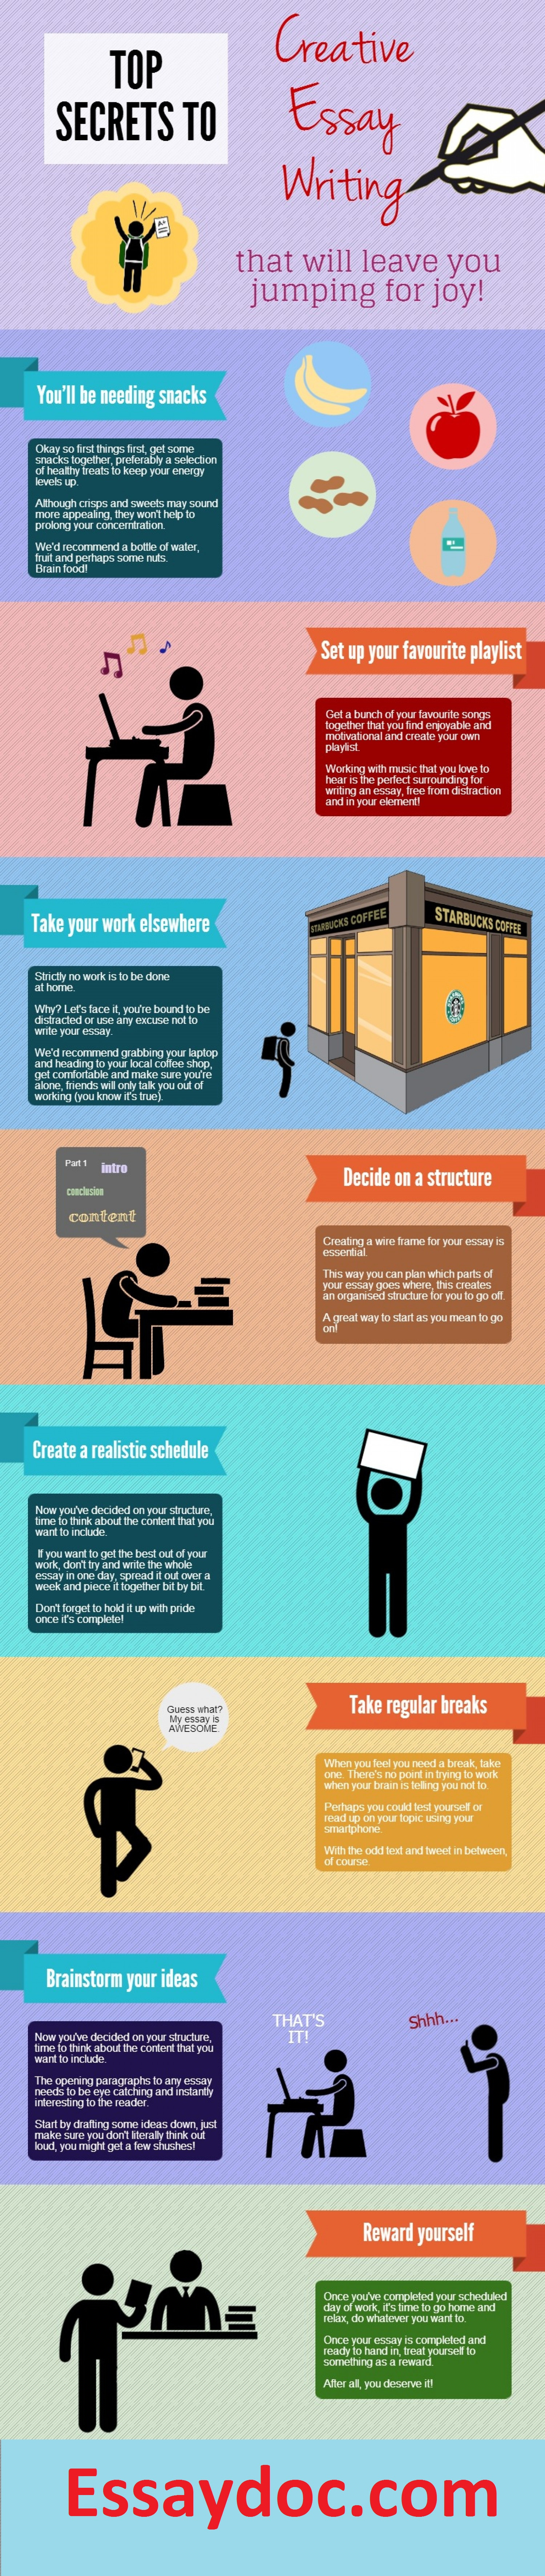 Steps to Follow for Essay Infographic